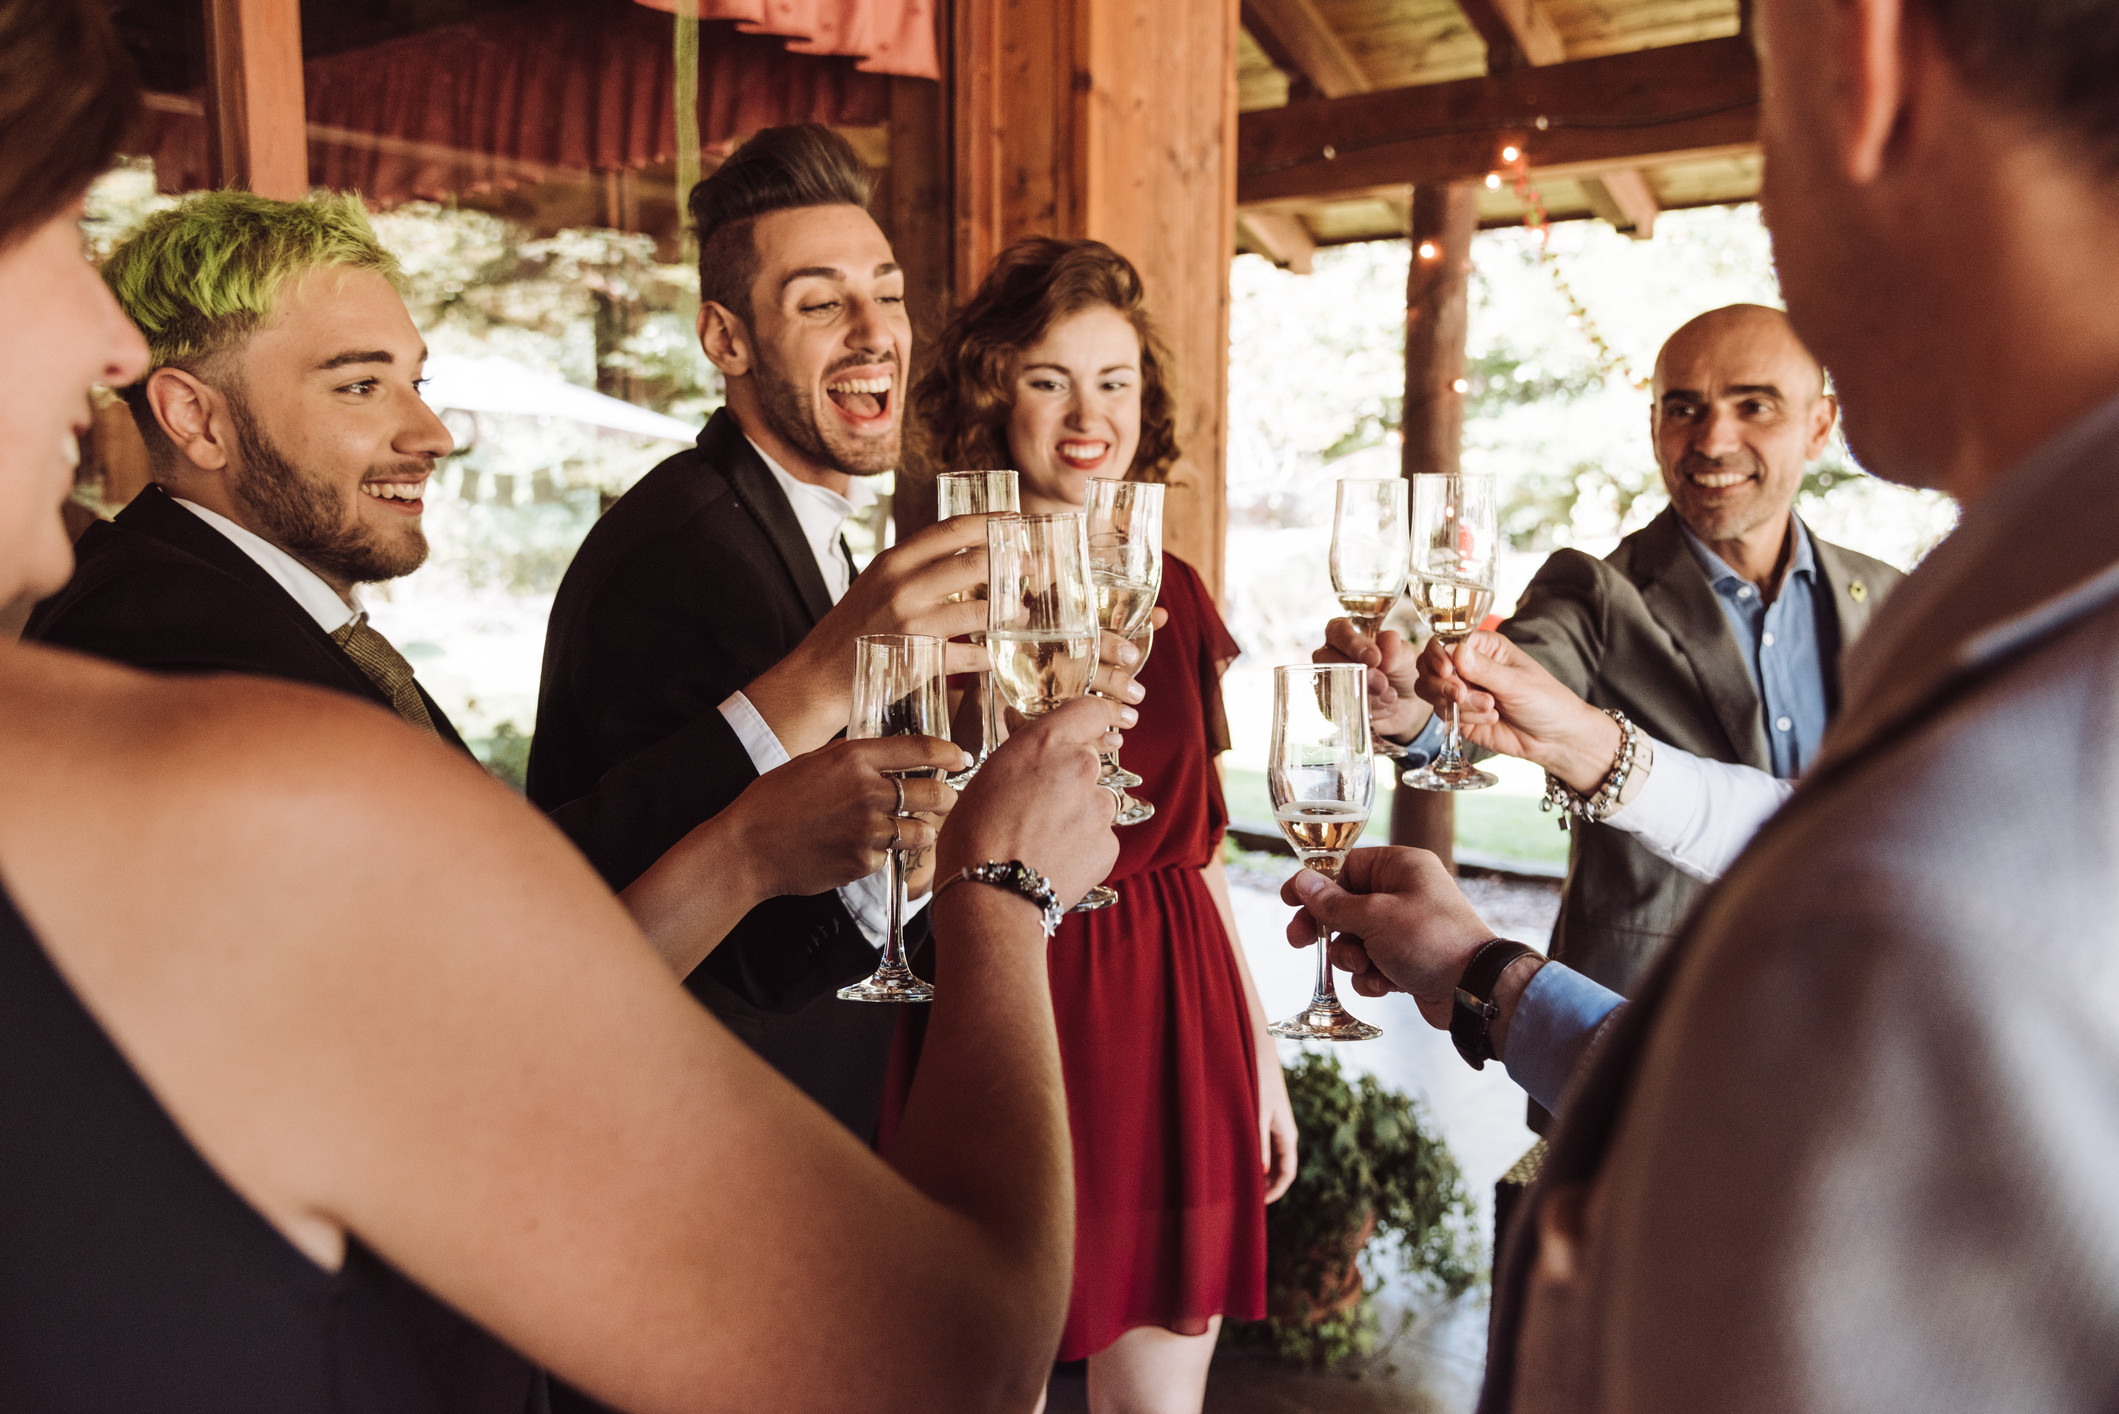 stock image of a wedding party cheersing